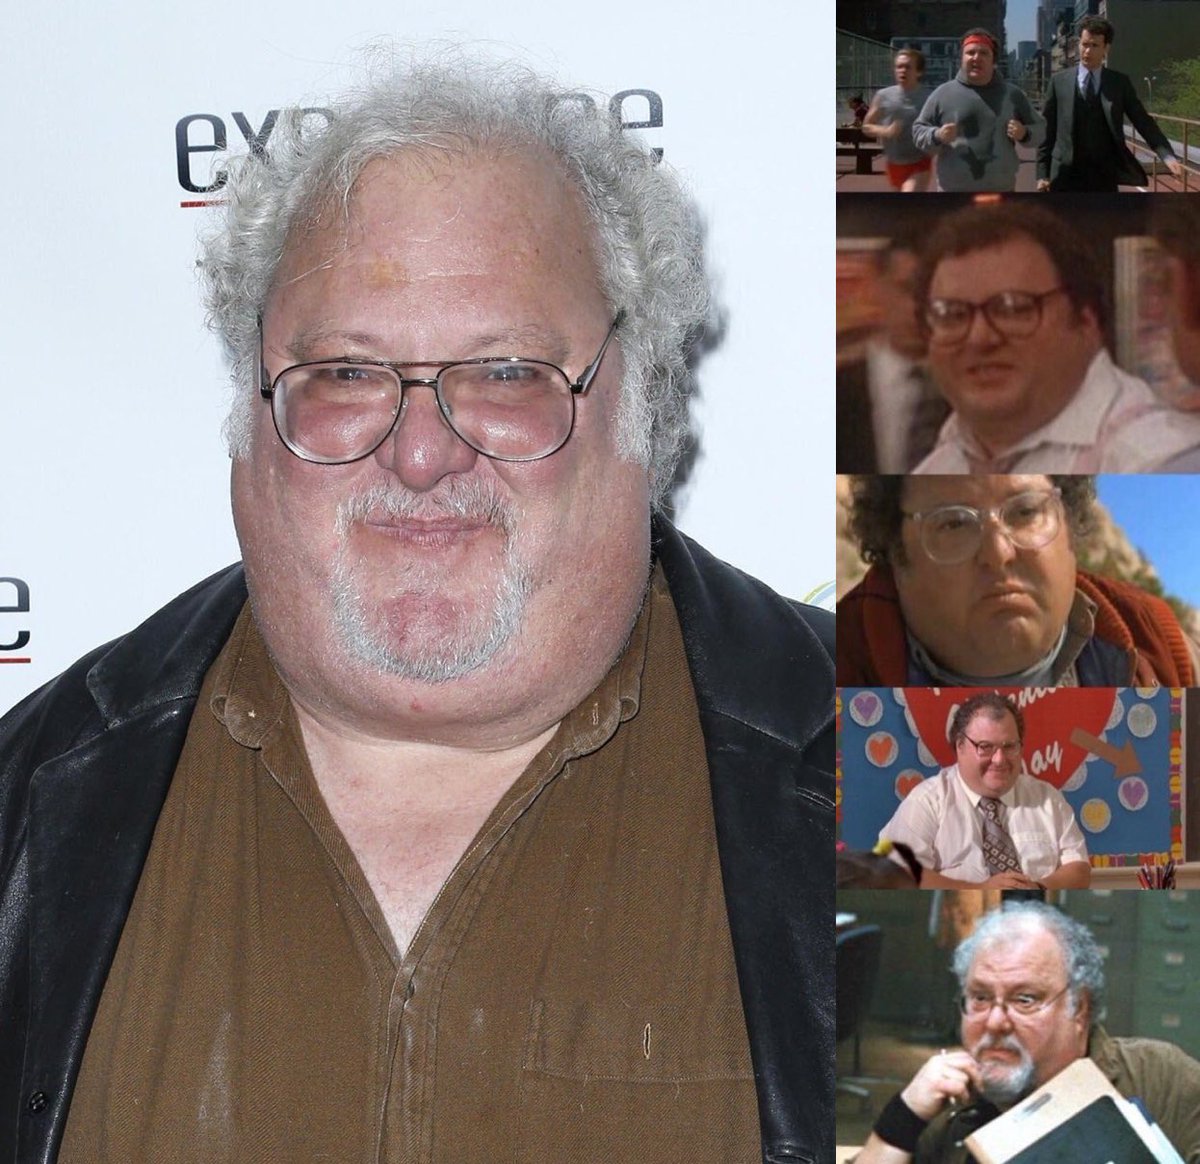 Happy 77th Birthday to Josh Mostel! The actor who played Jack Schnittman in The Money Pit, Ollie in Wall Street, Barry Shalowitz in City Slickers and City Slickers II: The Legend of Curly’s Gold, Principal Max Anderson in Billy Madison, and Pete in State of Play. #JoshMostel